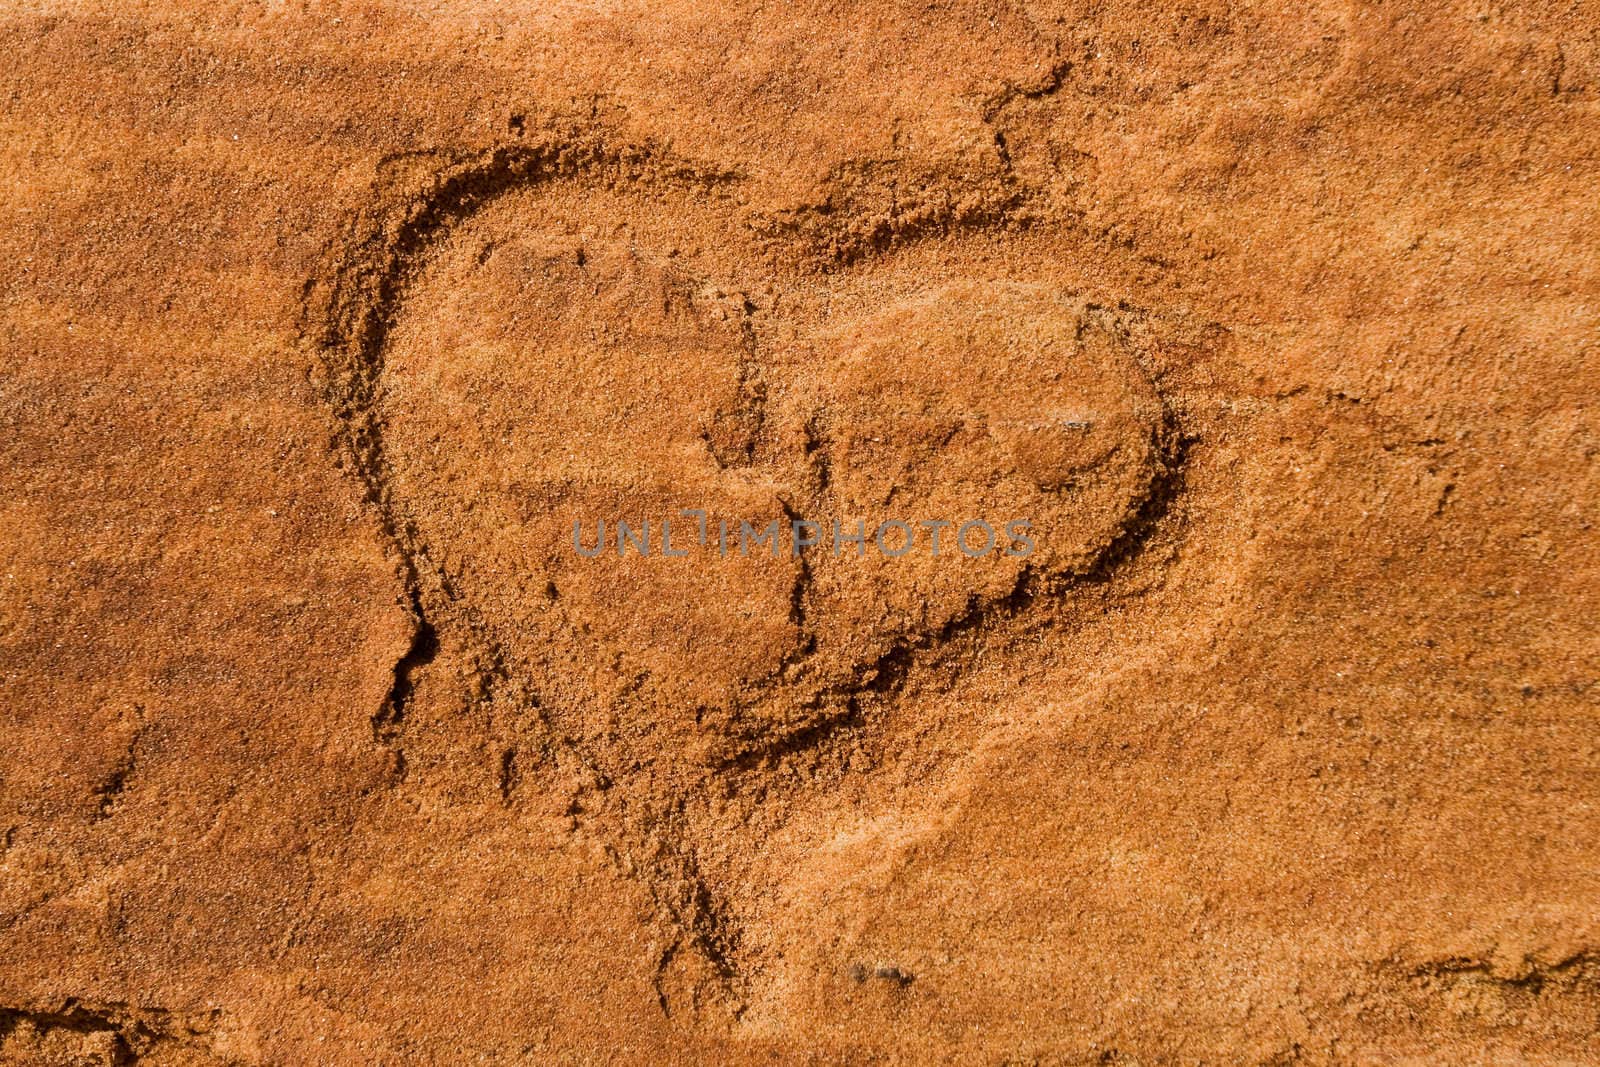 Shape of an heart scraped into the red sandstone